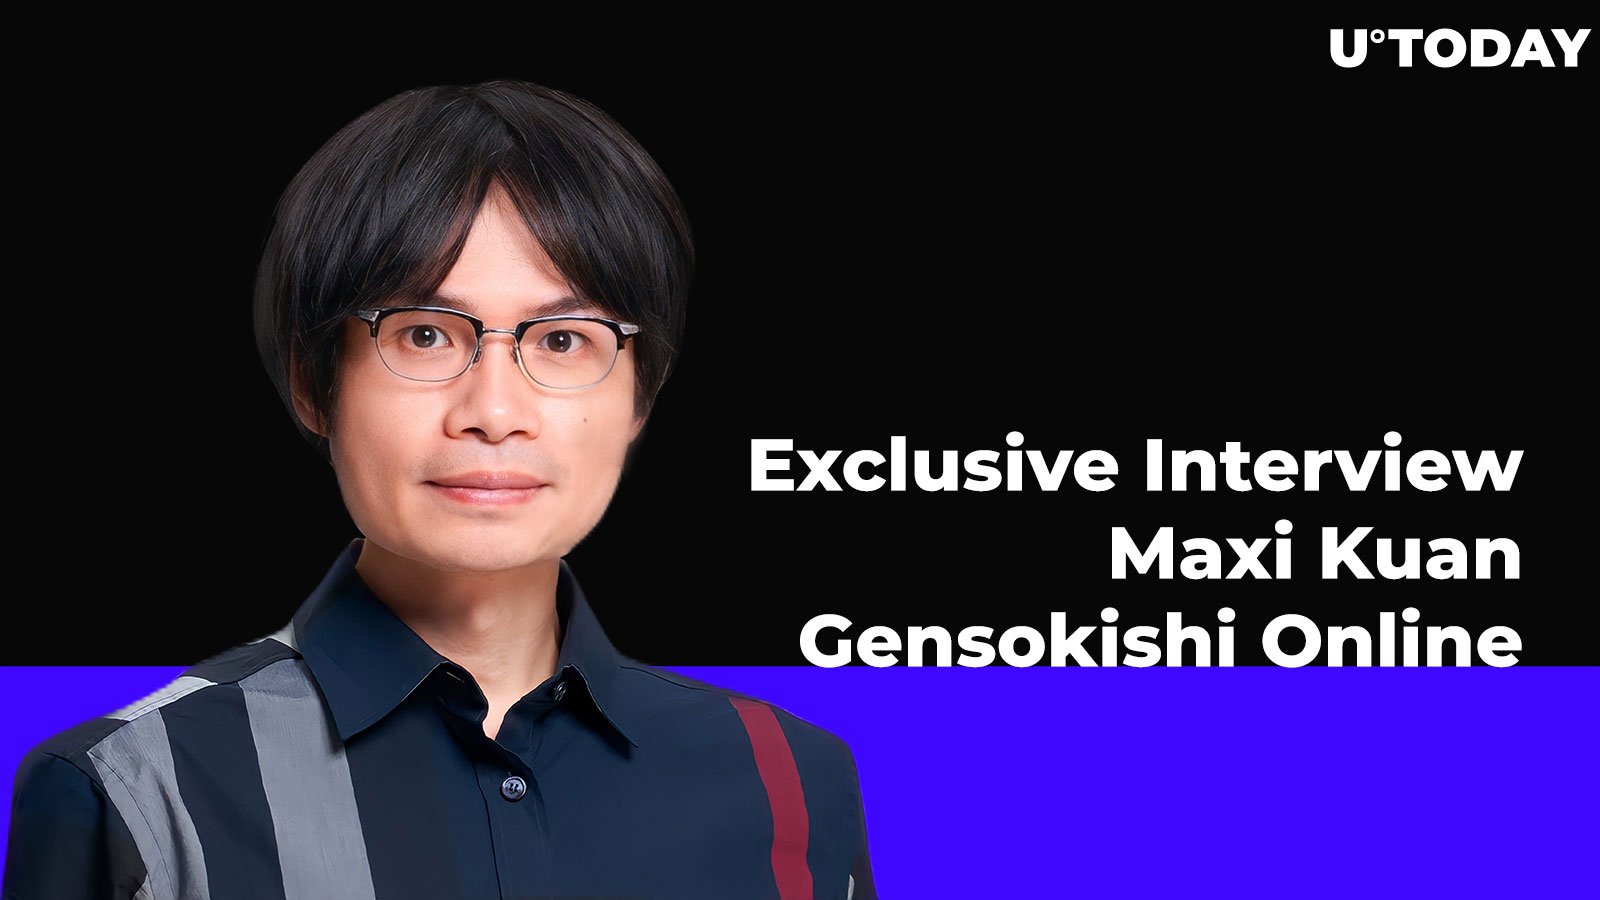 Final Fantasy Artist’s NFT Collection, Successful Android Beta Tests and New Features in GensoKishi Online: Exclusive Interview